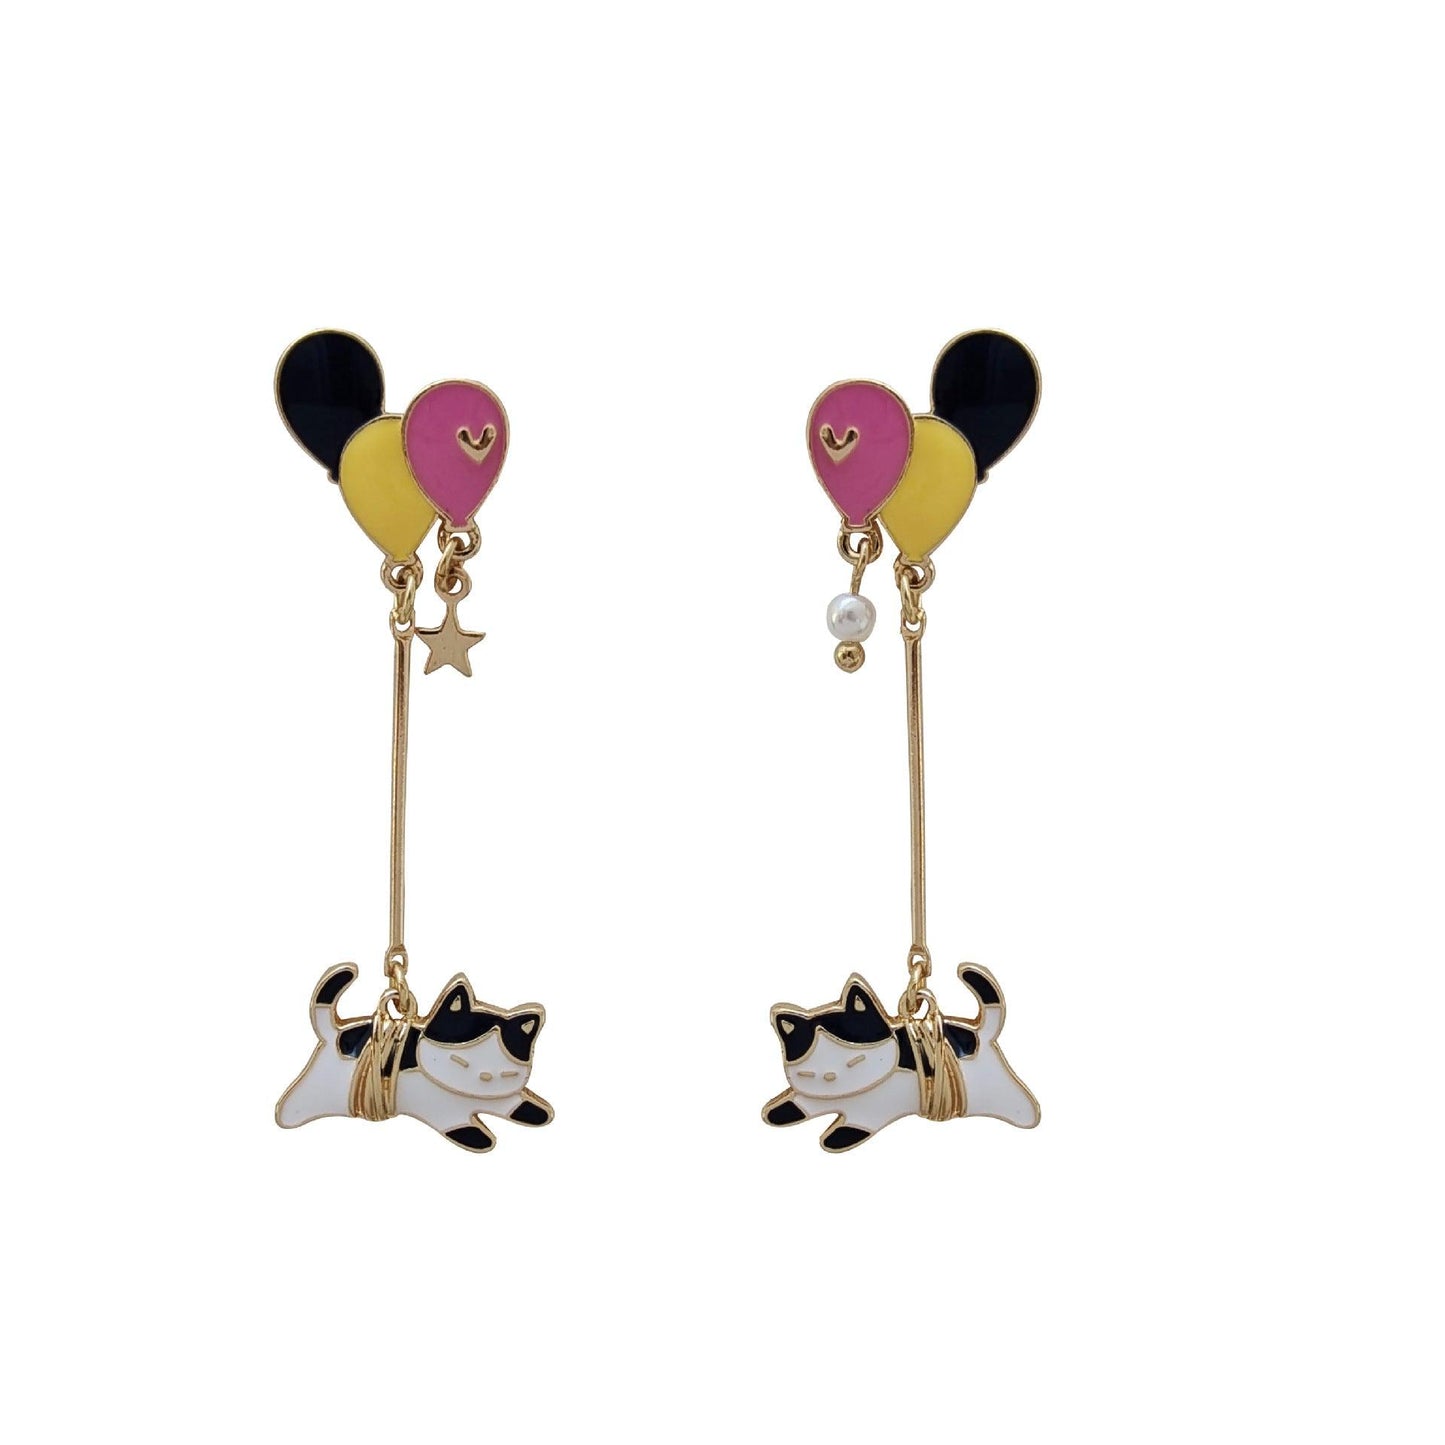 1 Pair Colorful Balloon Cat Earrings - Belle Rose Nails